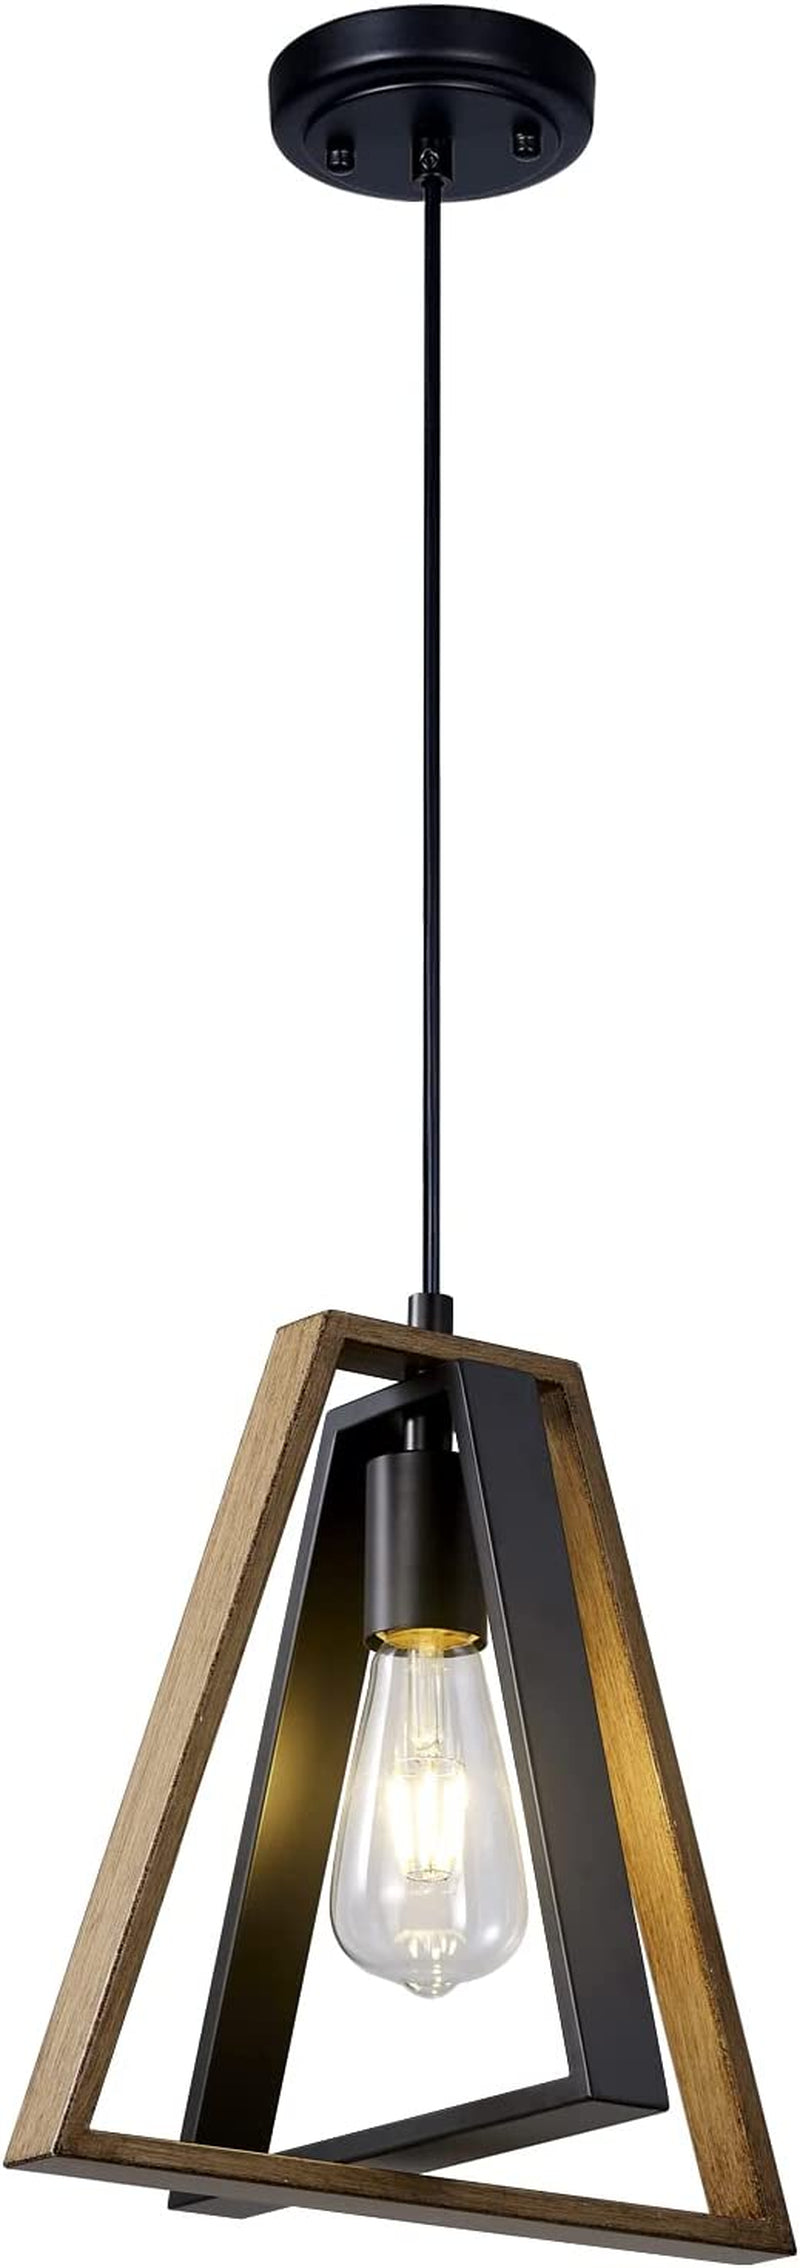 1-Light Adjustable Pendant Light, Farmhouse Pendant Lighting for Kitchen Island, Black and Wood Painted Rustic Hanging Light Fixtures for Dining Room, Hallway, Entryway, Bar, Porch, Cafe